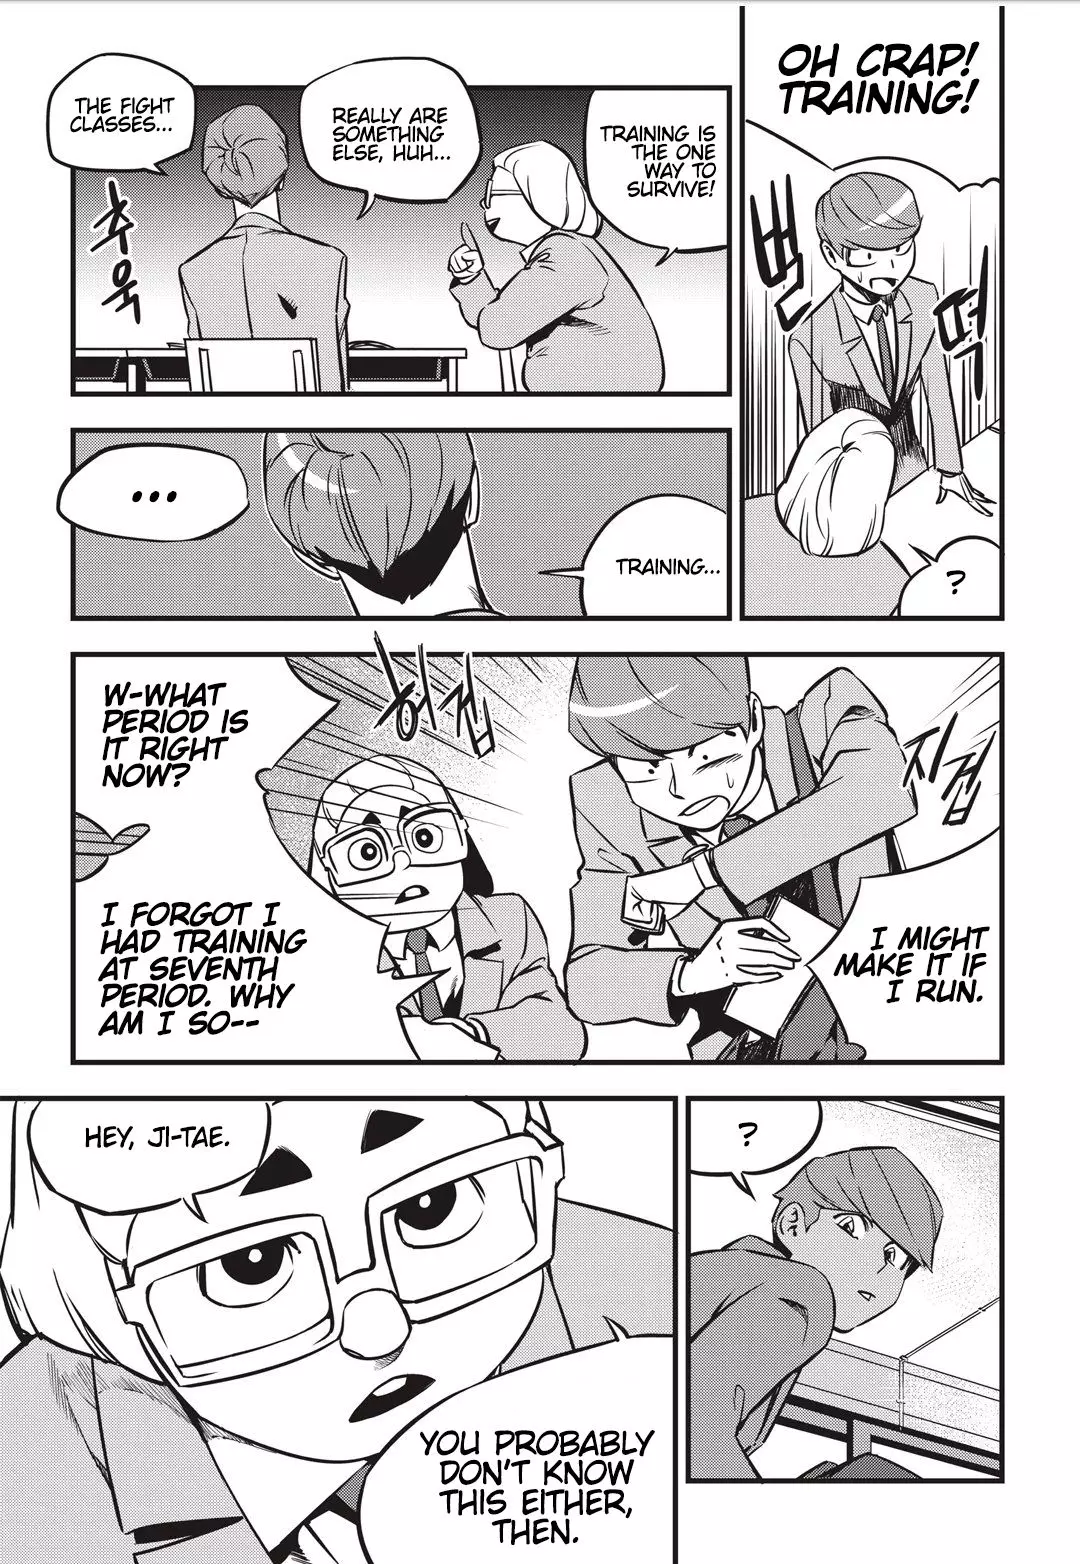 Fight Class 3 - 3 page 024